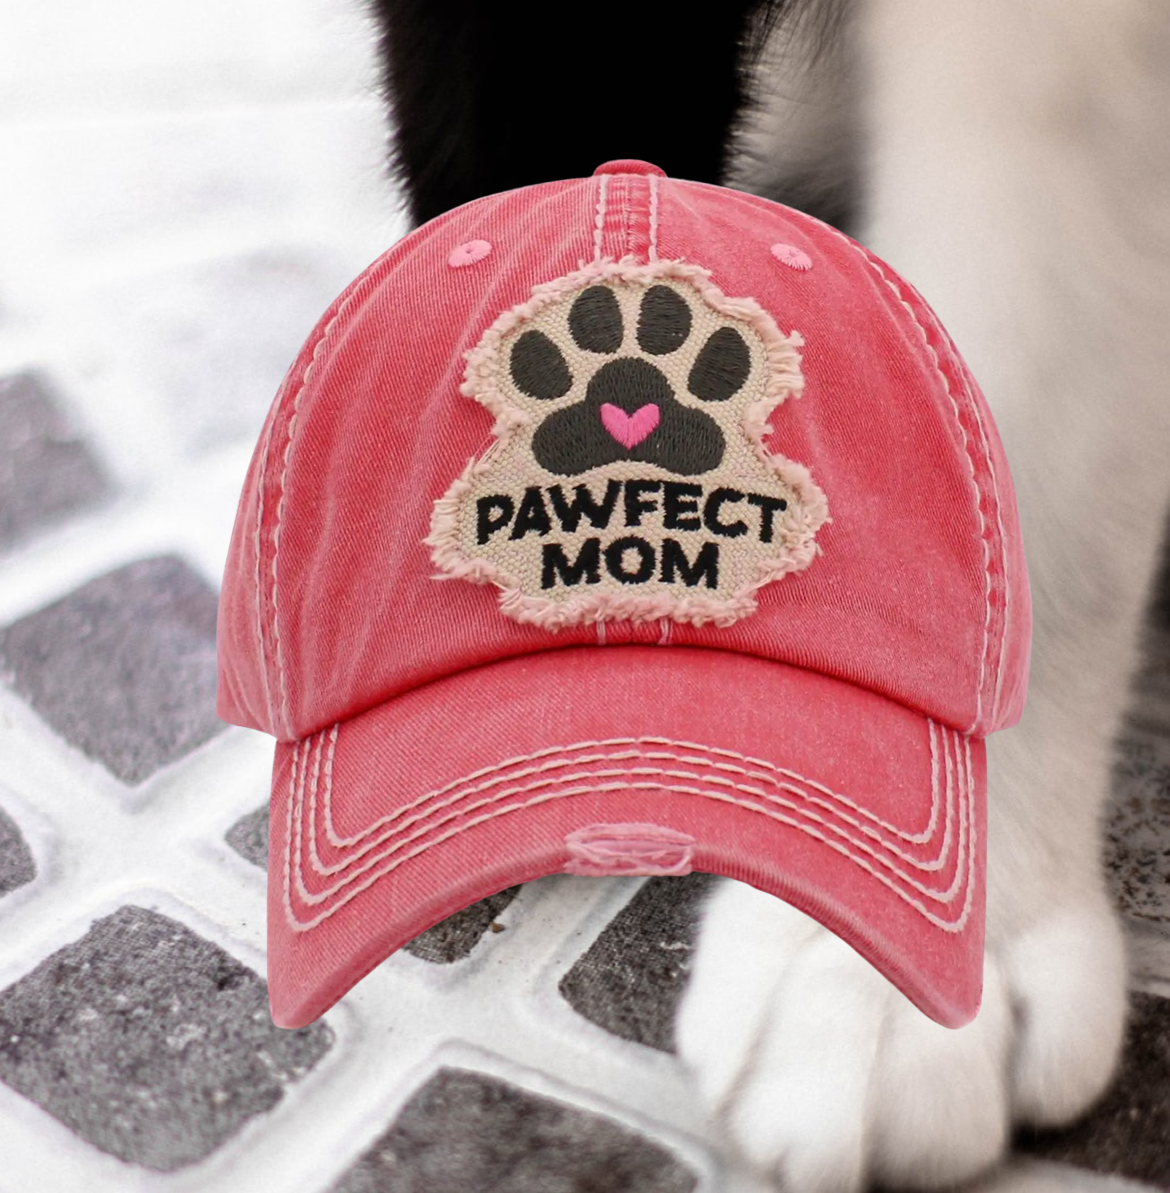 Pawfect Mom Hat Distressed Hot Pink Baseball Cap